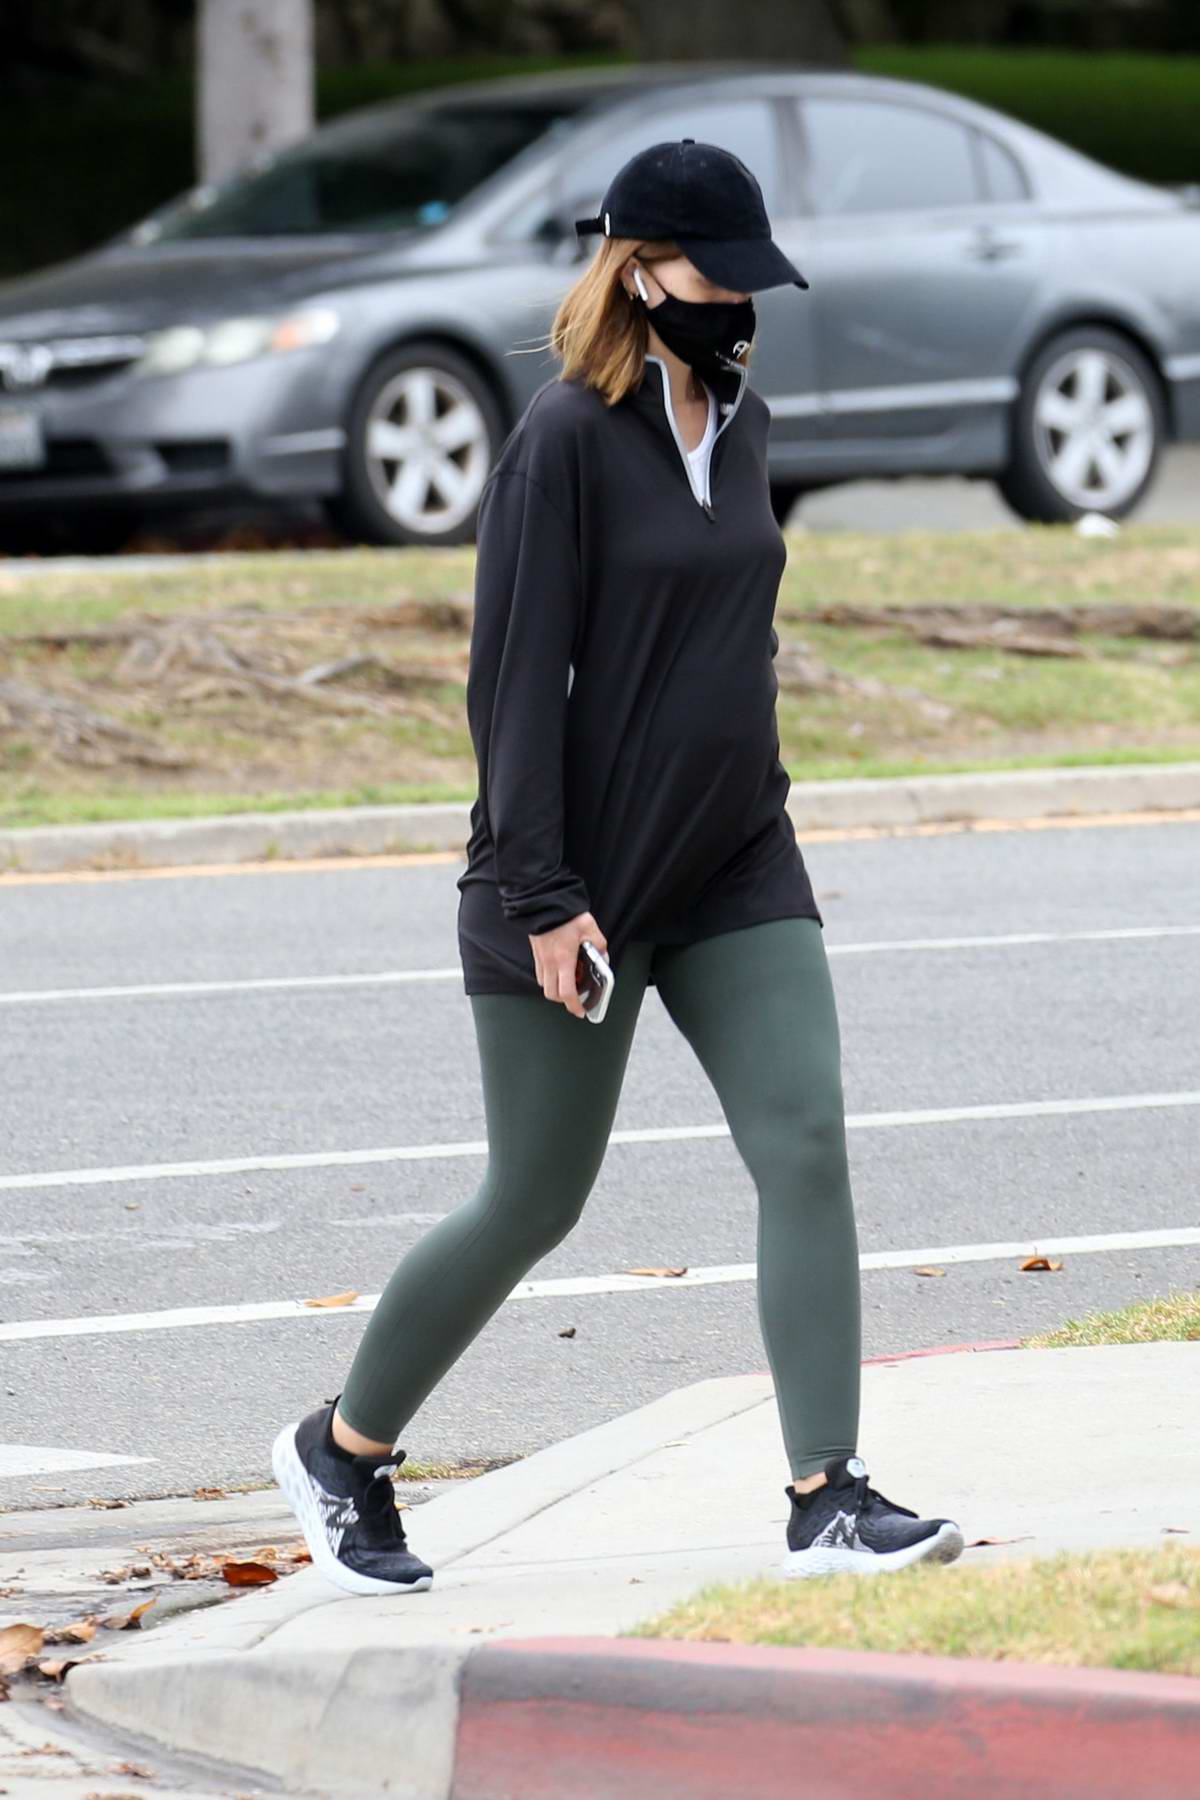 https://www.celebsfirst.com/wp-content/uploads/2020/05/katherine-schwarzenegger-wears-a-face-mask-with-an-oversized-shirt-and-leggings-for-an-stroll-in-santa-monica-california-270520_7.jpg